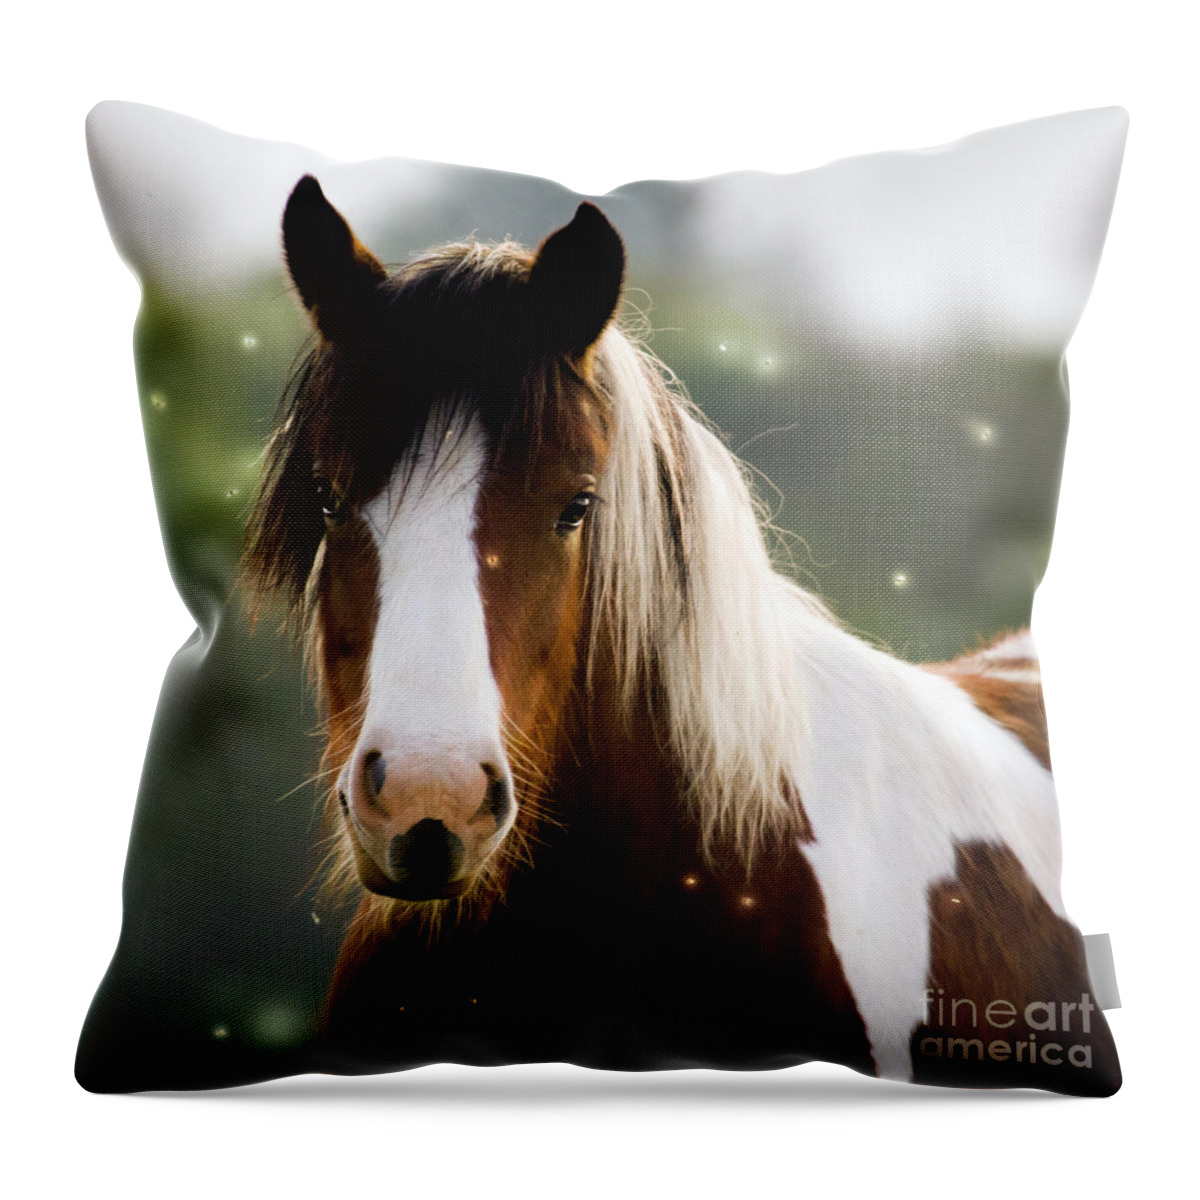 Fairy Throw Pillow featuring the photograph Fairytale Pony by Ang El